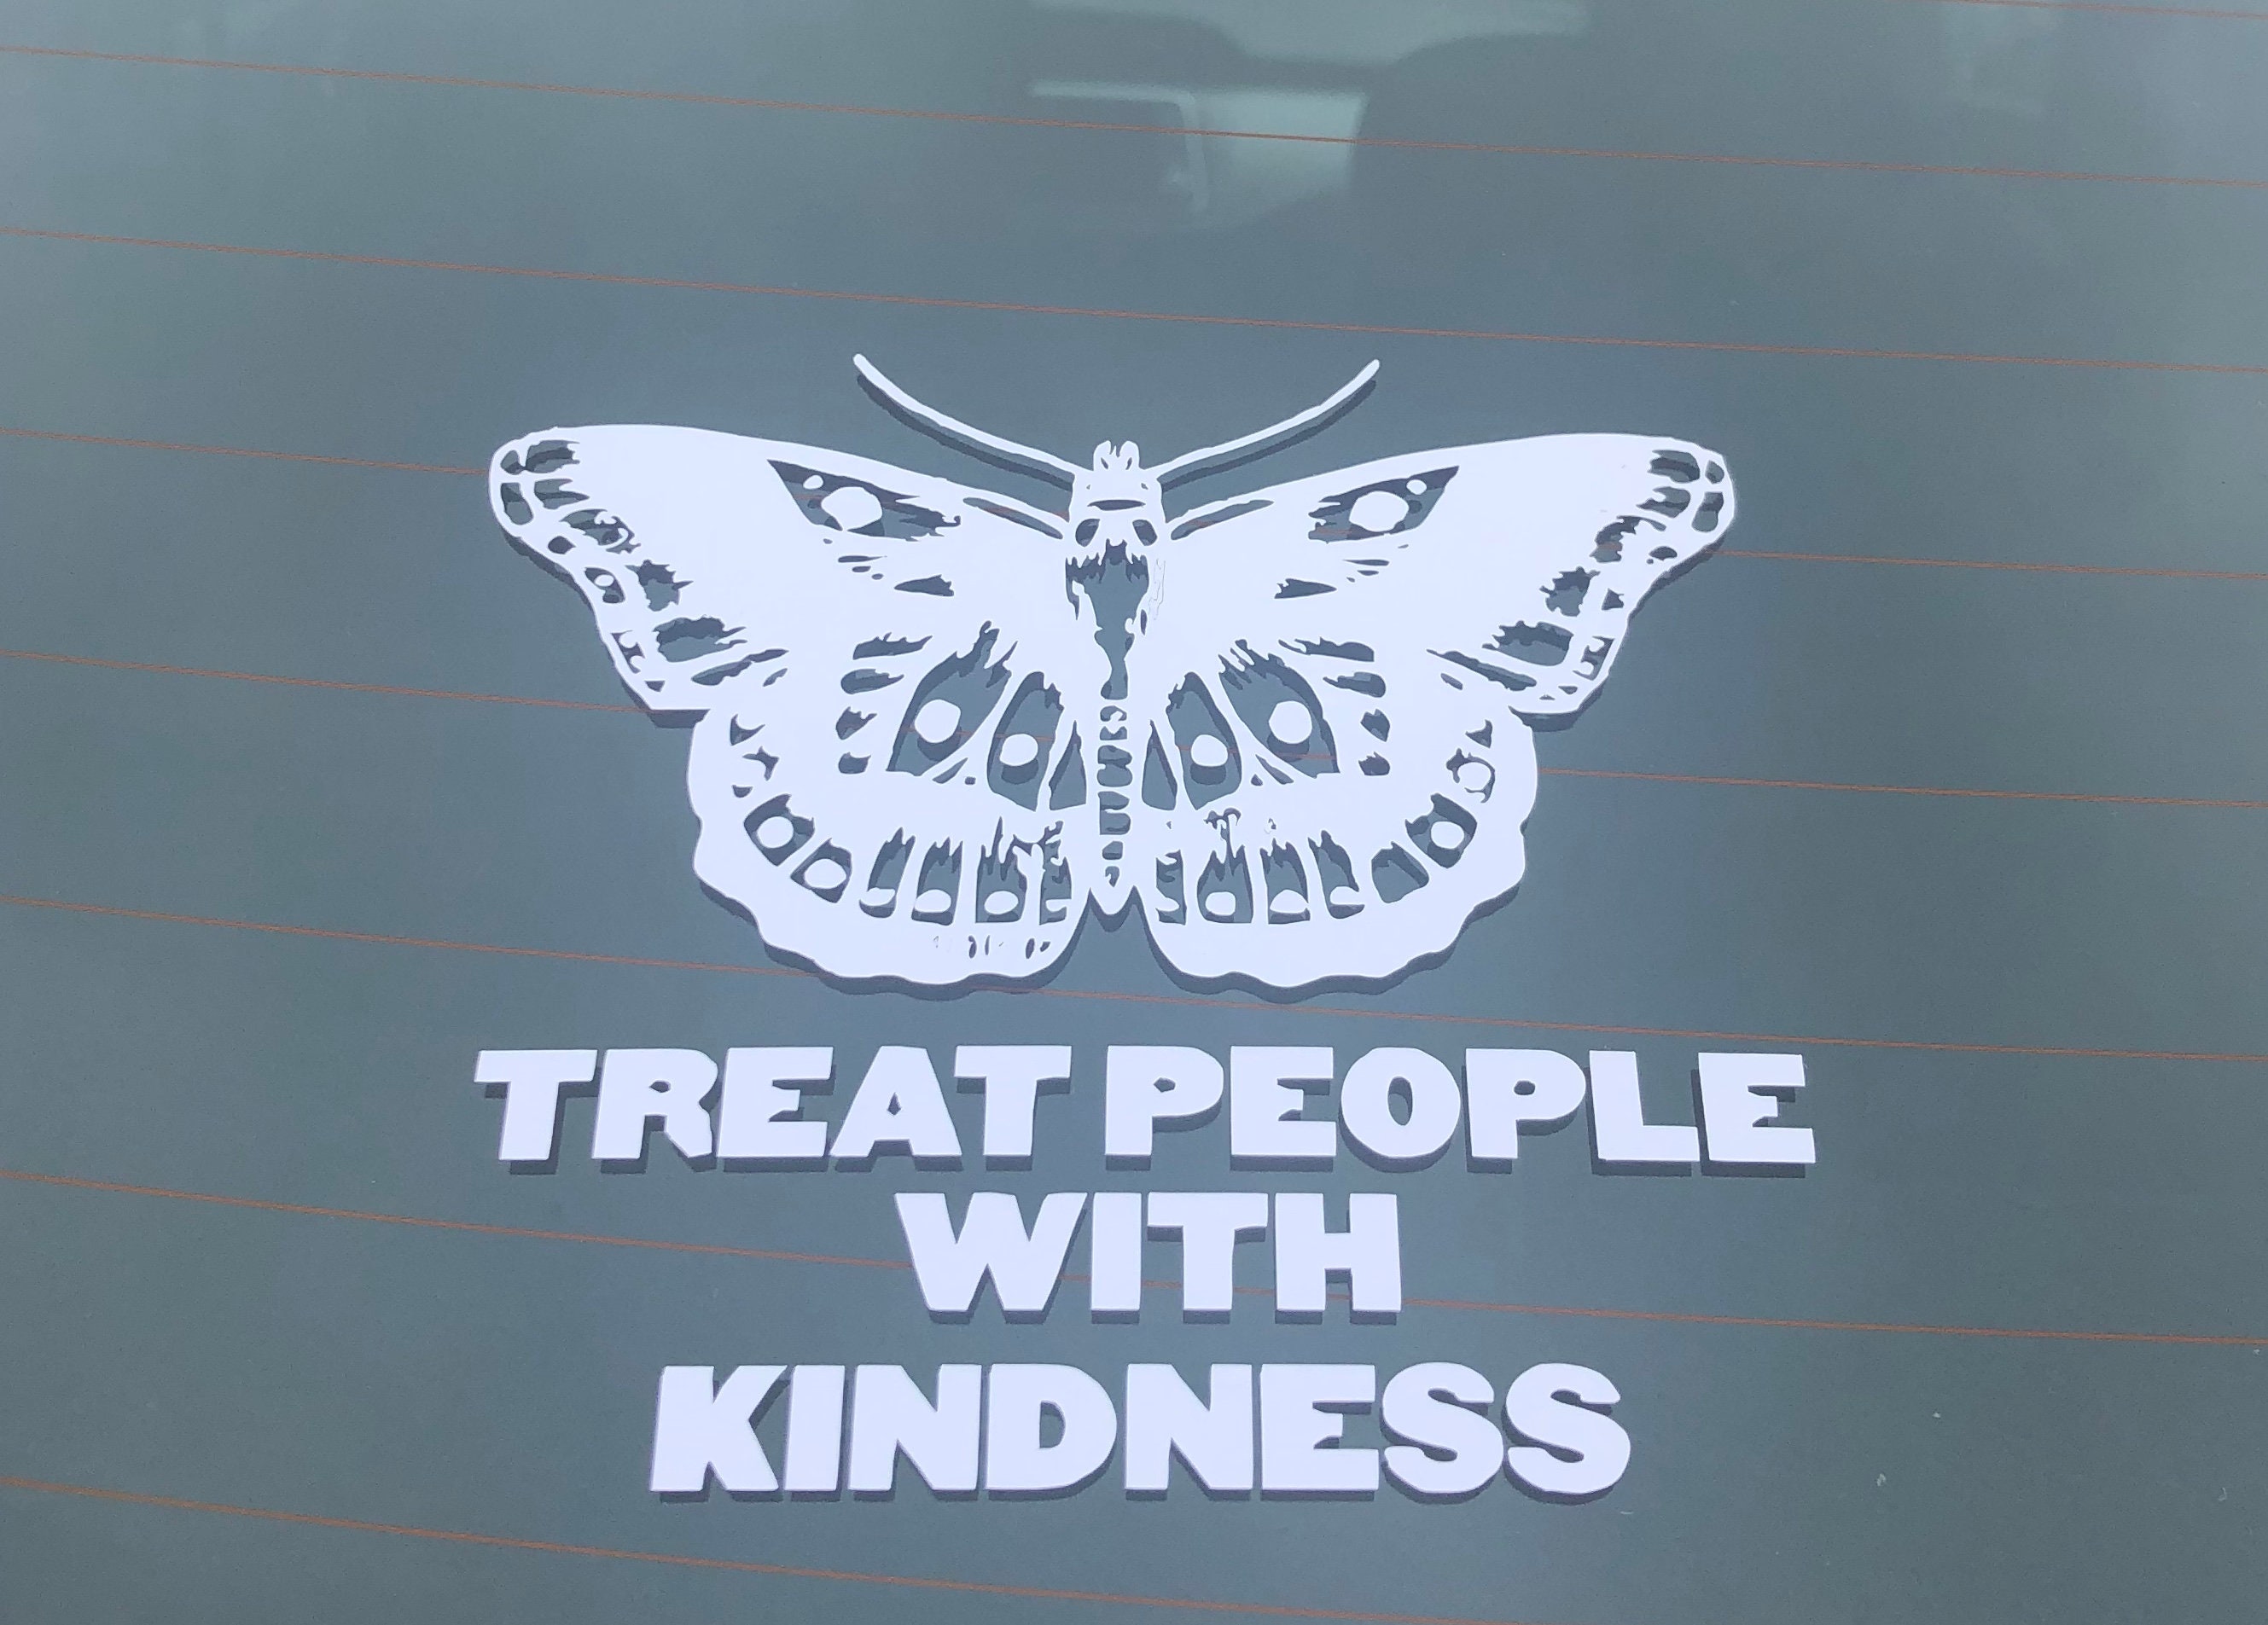 Harry Styles Kindness Sticker from Citizen Ruth – Urban General Store